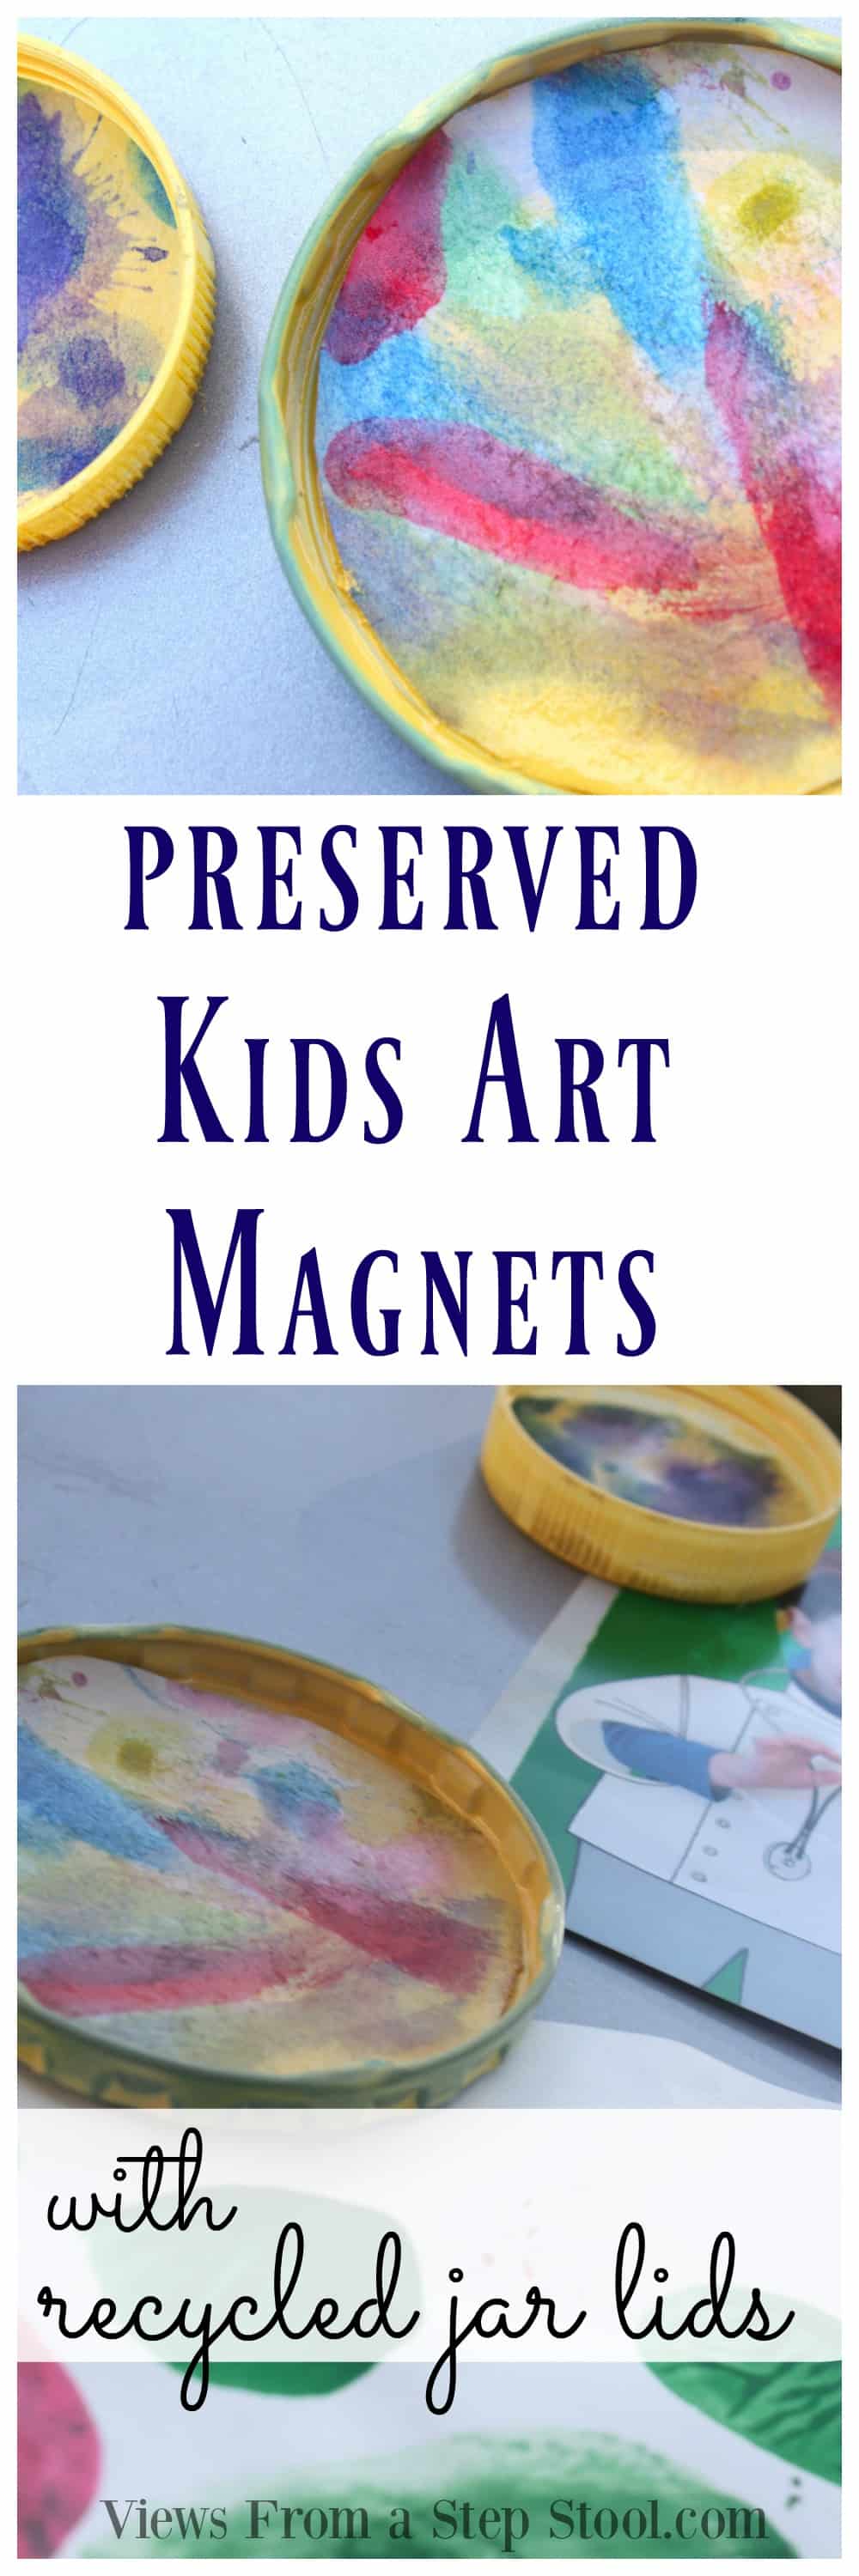 preserved-kids-art-magnets-pin